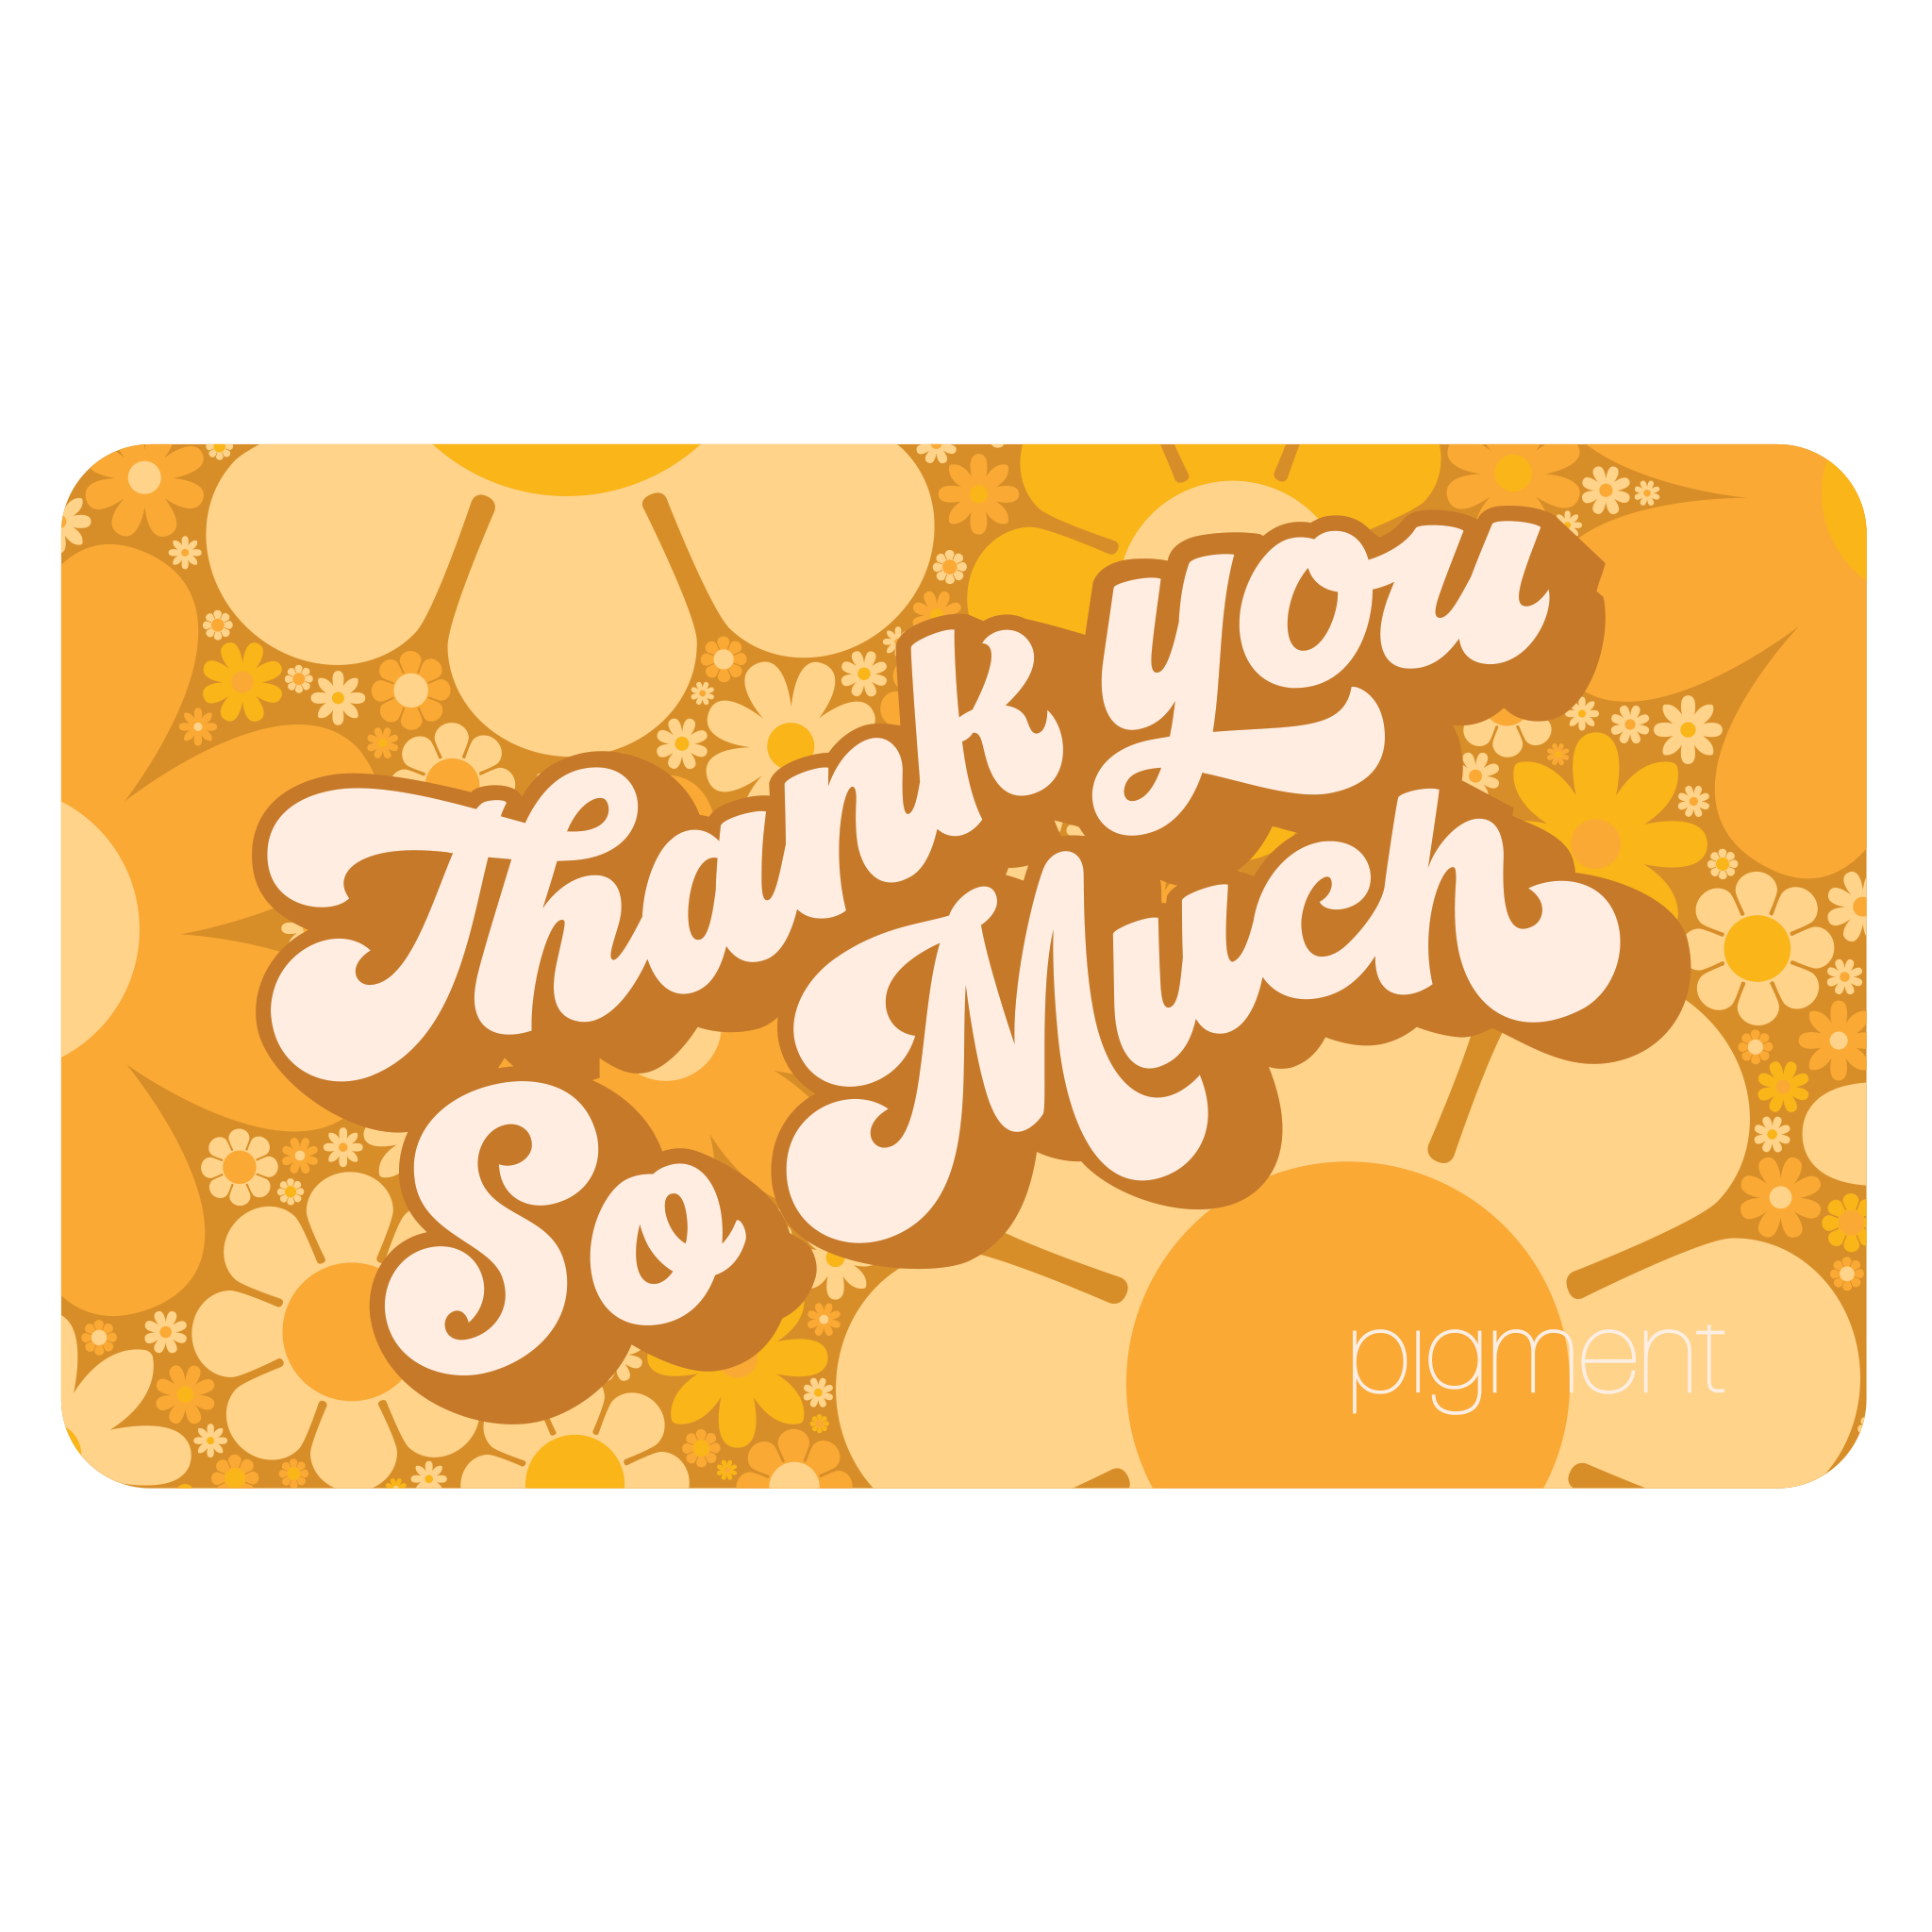 On a white background is a yellow daisy print gift card with white text in the center that reads, "Thank You So Much" in a groovy font. 